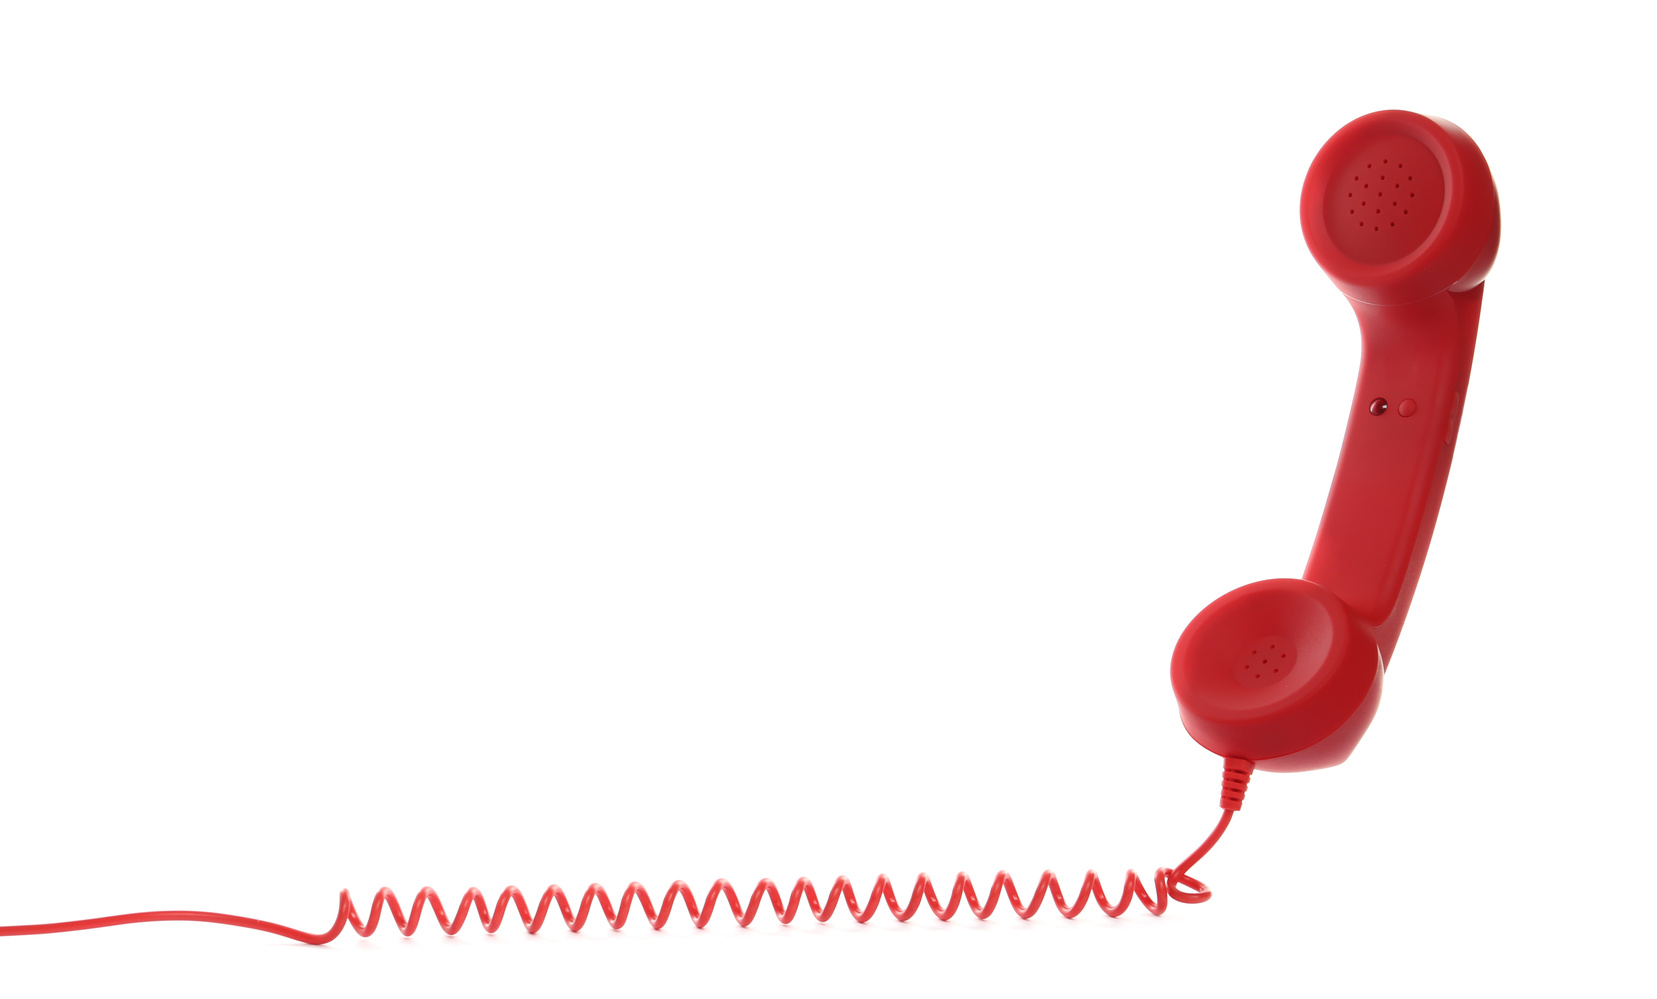 Red Corded Telephone Handset on White Background. Hotline Concept